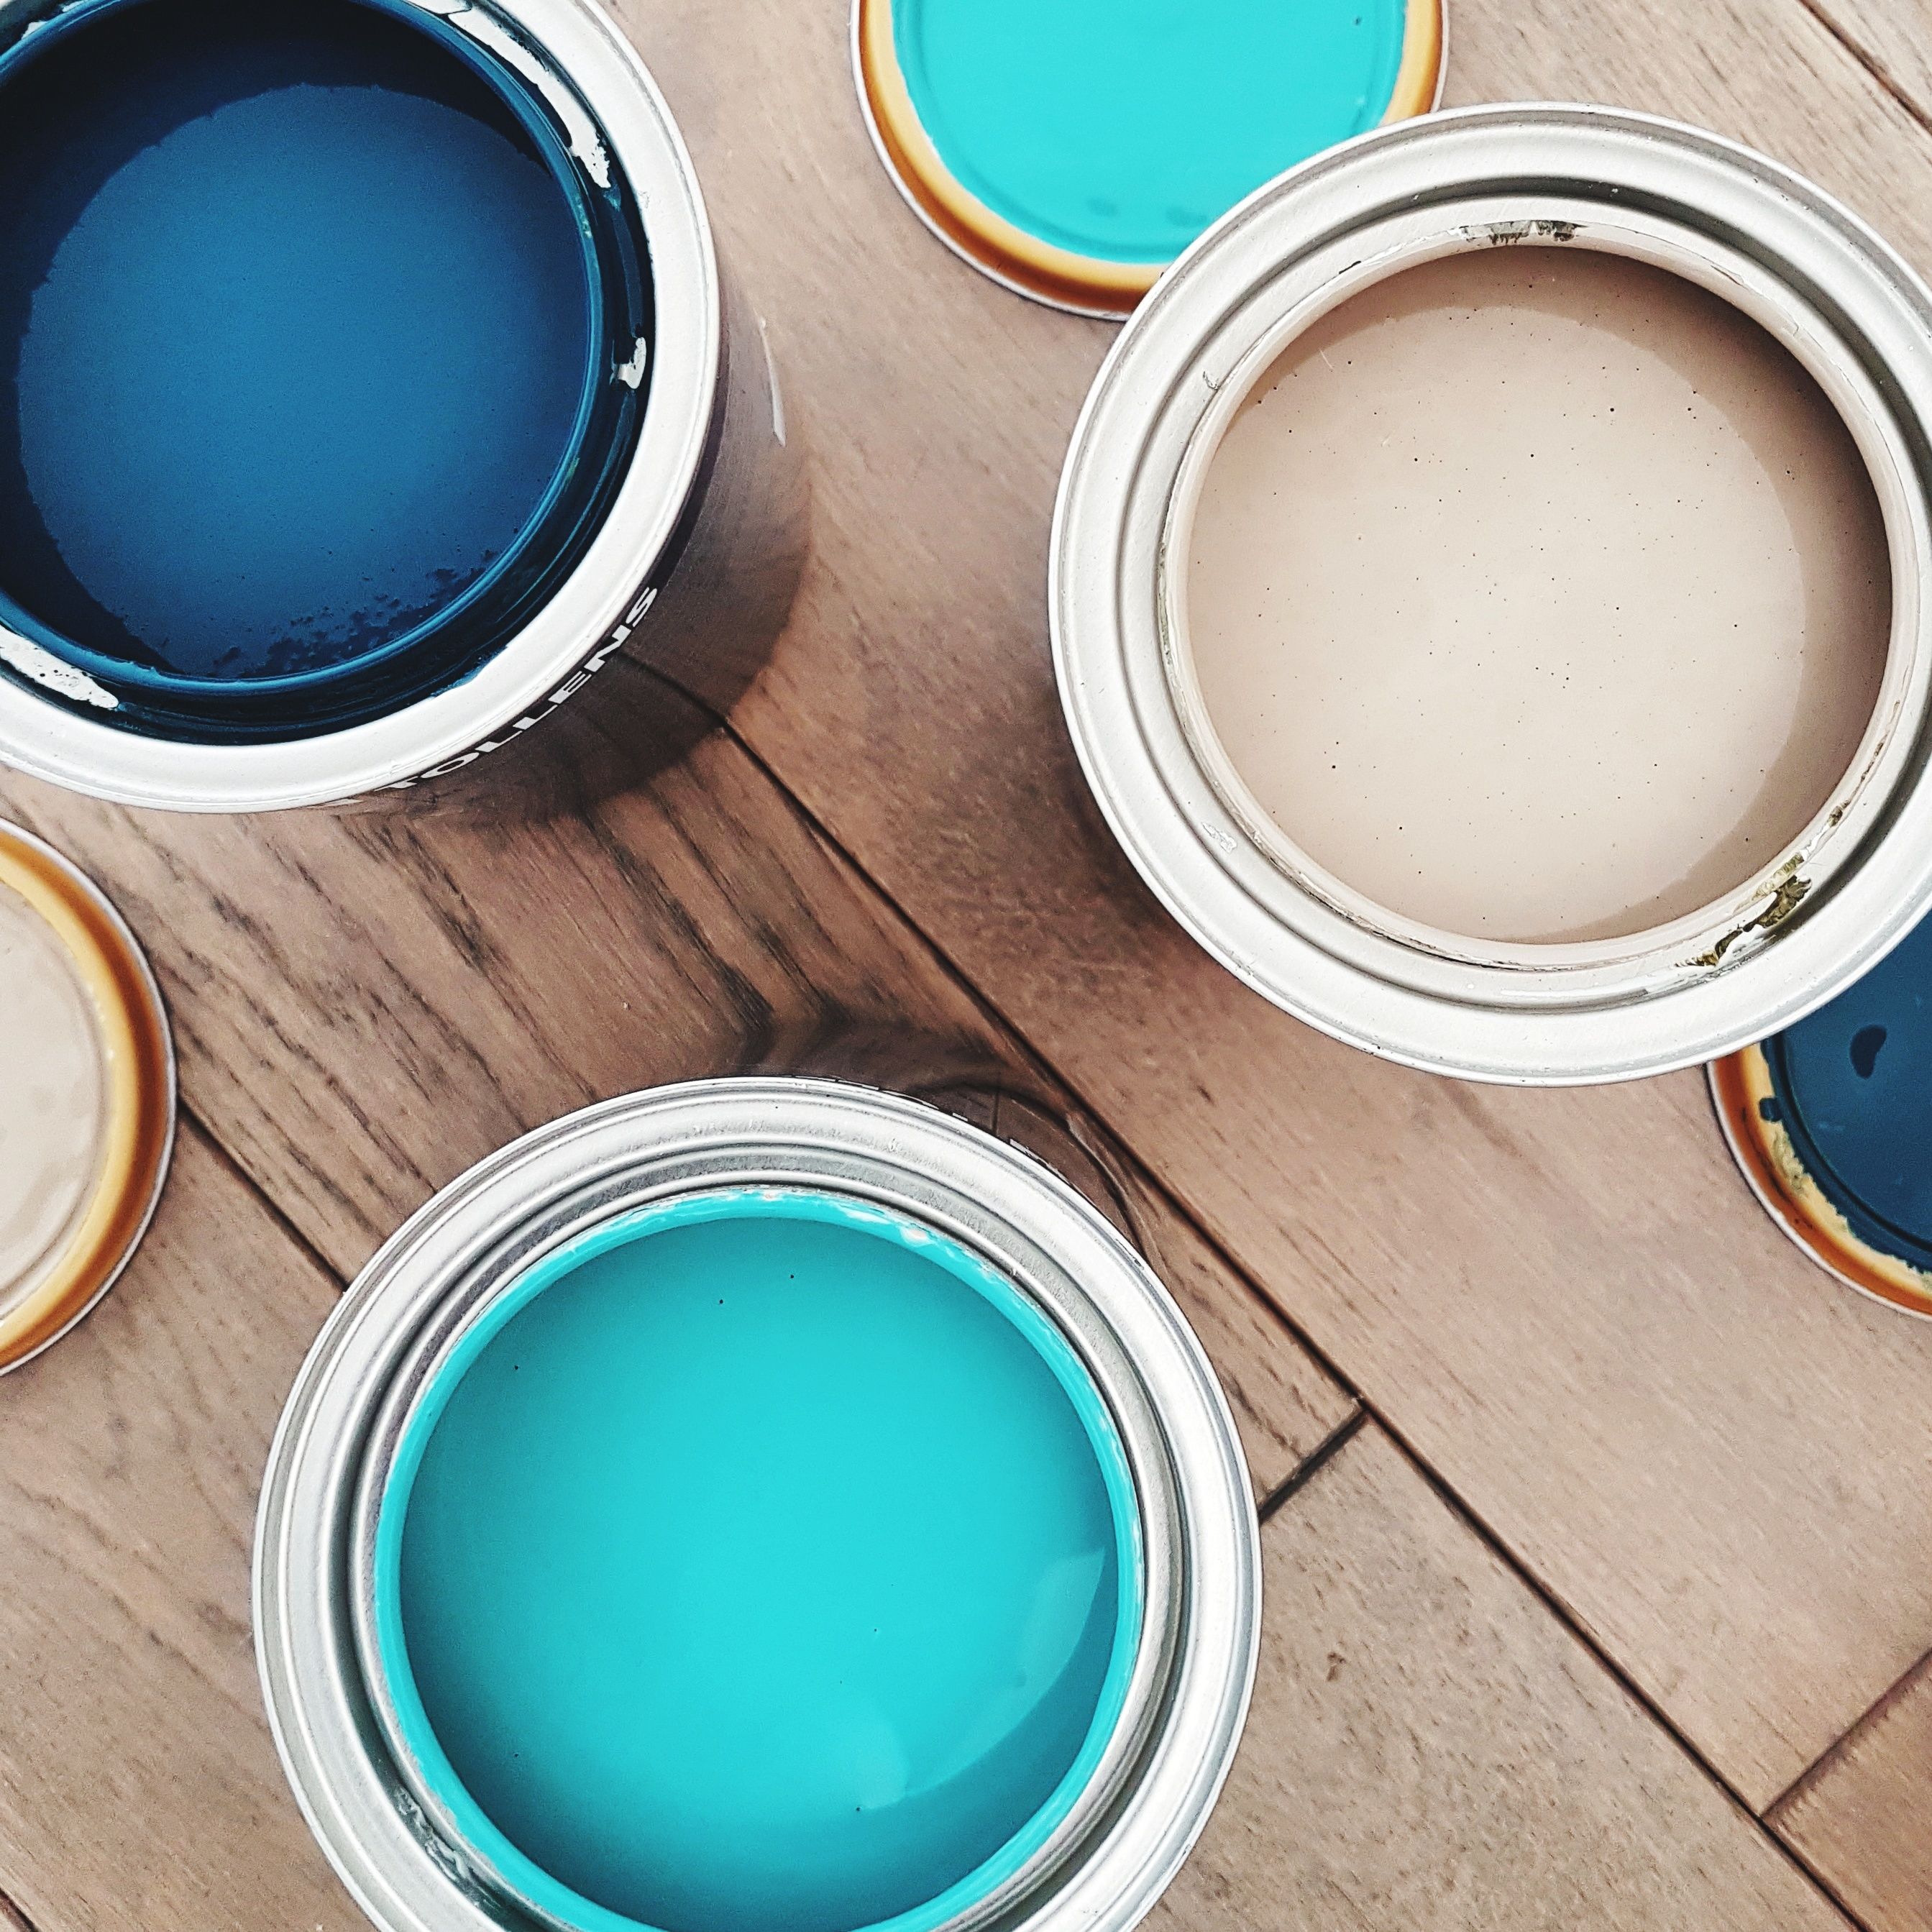 How to Get Rid of Paint Safely, According to a Paint Expert